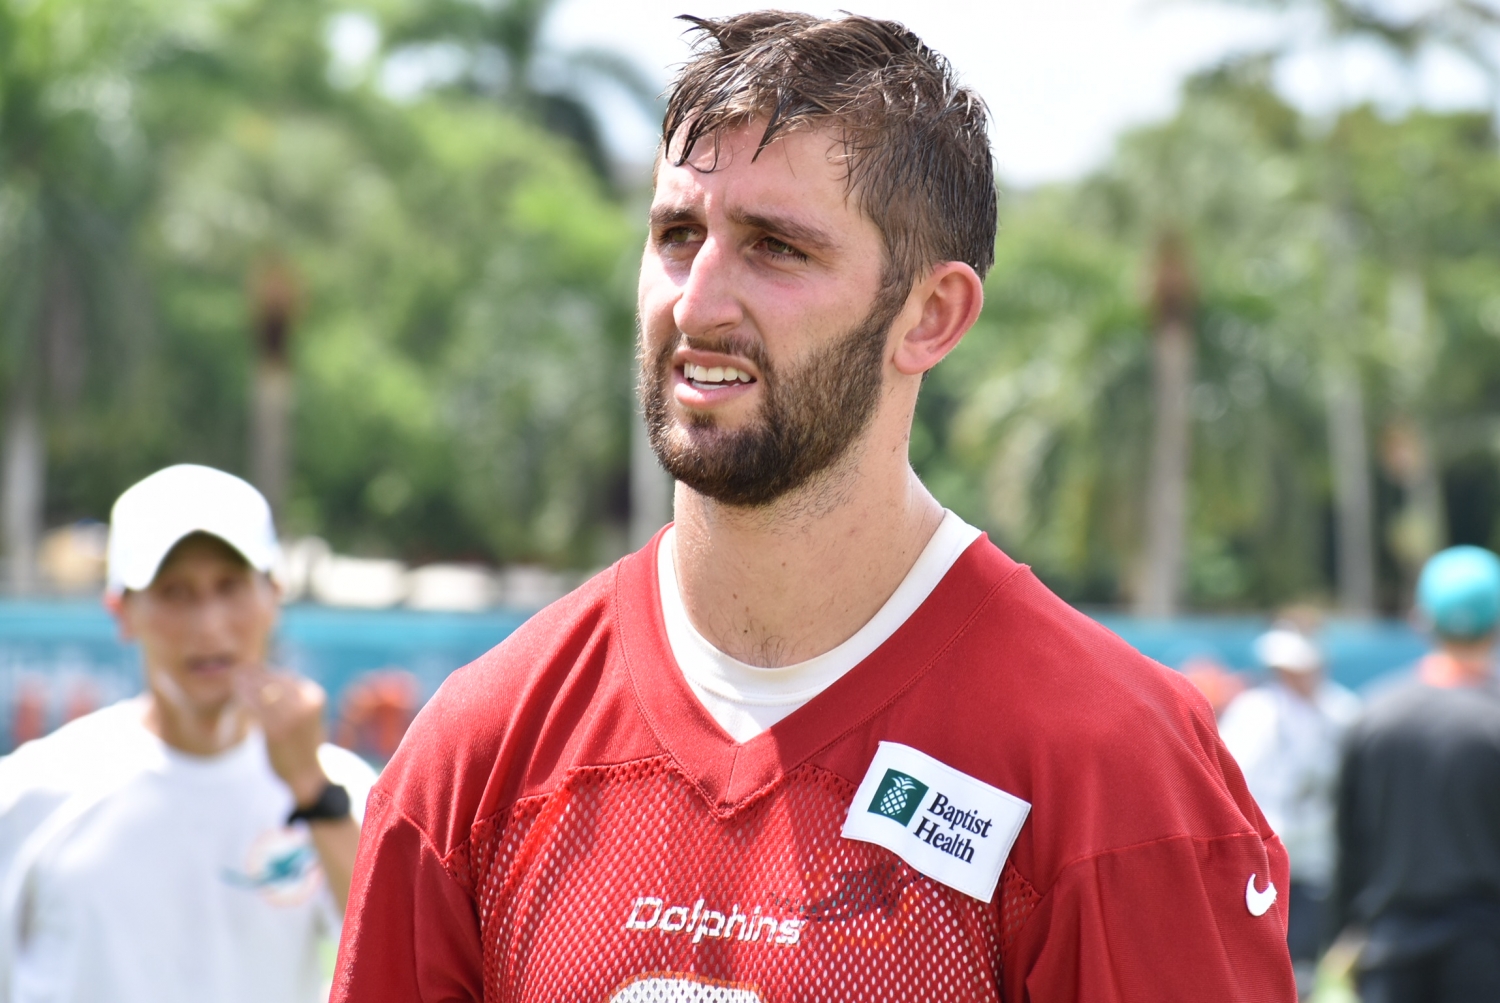 Josh Rosen has produced mixed results in his quest to be the Dolphins' starting quarterback.